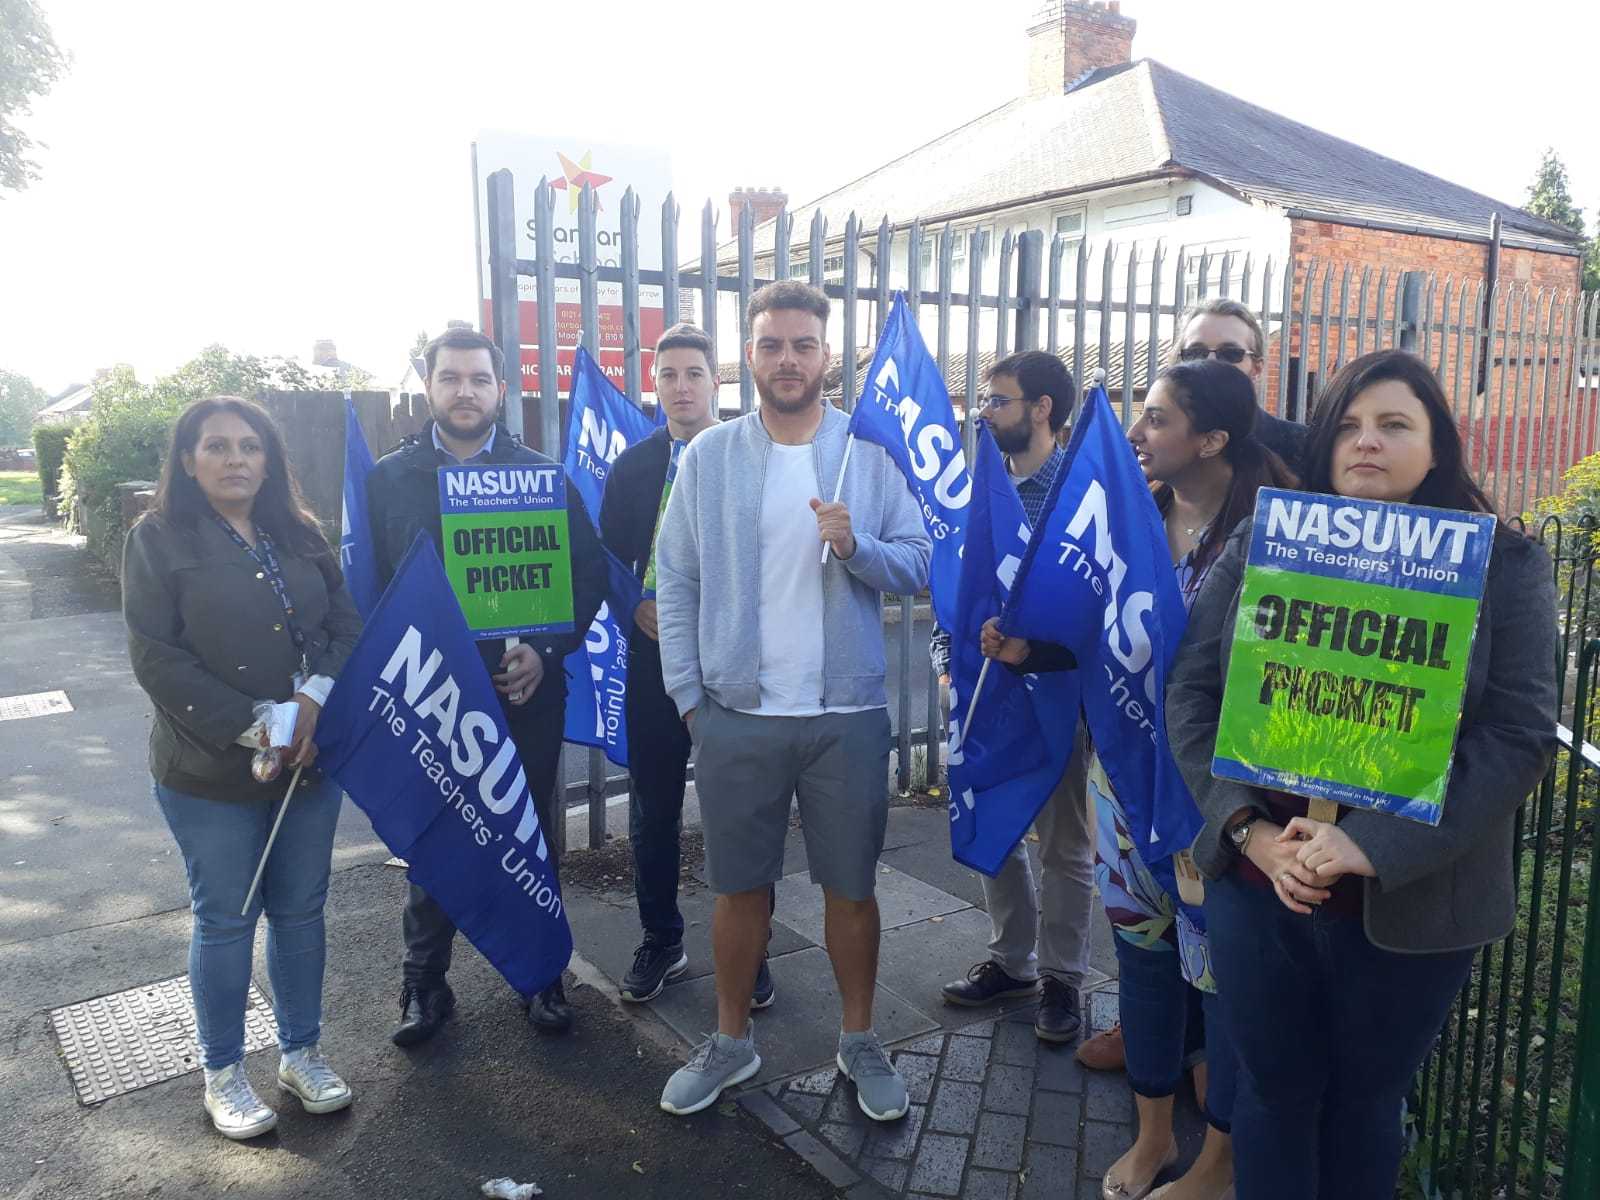 Staff outside Starbank School in Hob Moor Road, Birmingham, during a strike over concerns for staff and pupil safety. (Credit: NASUWT/PA)